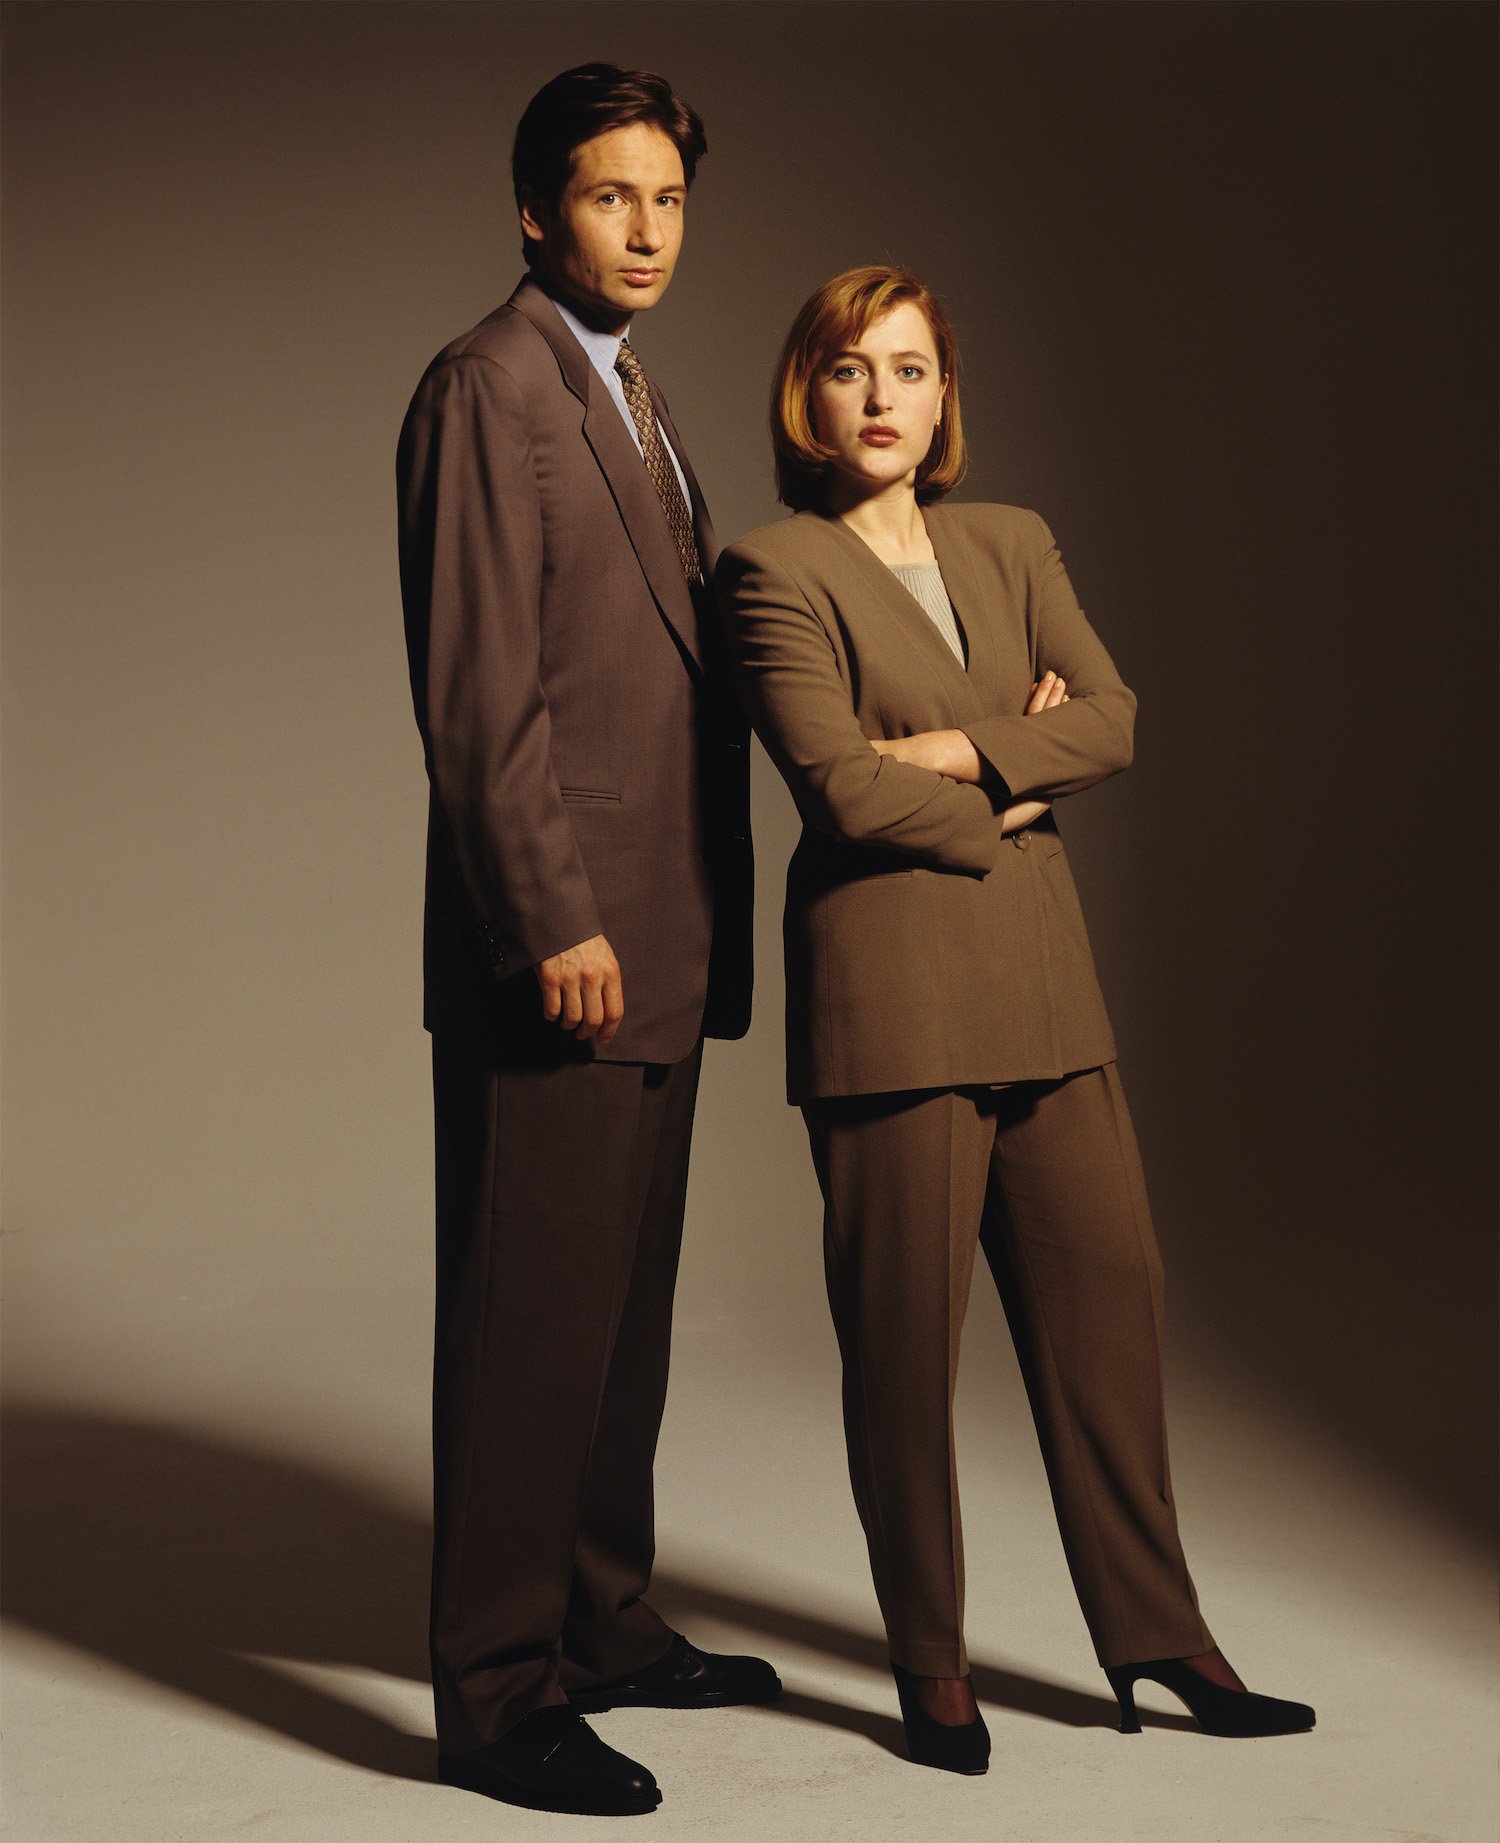 Gillian Anderson and David Duchovny Portrait Session The X Files